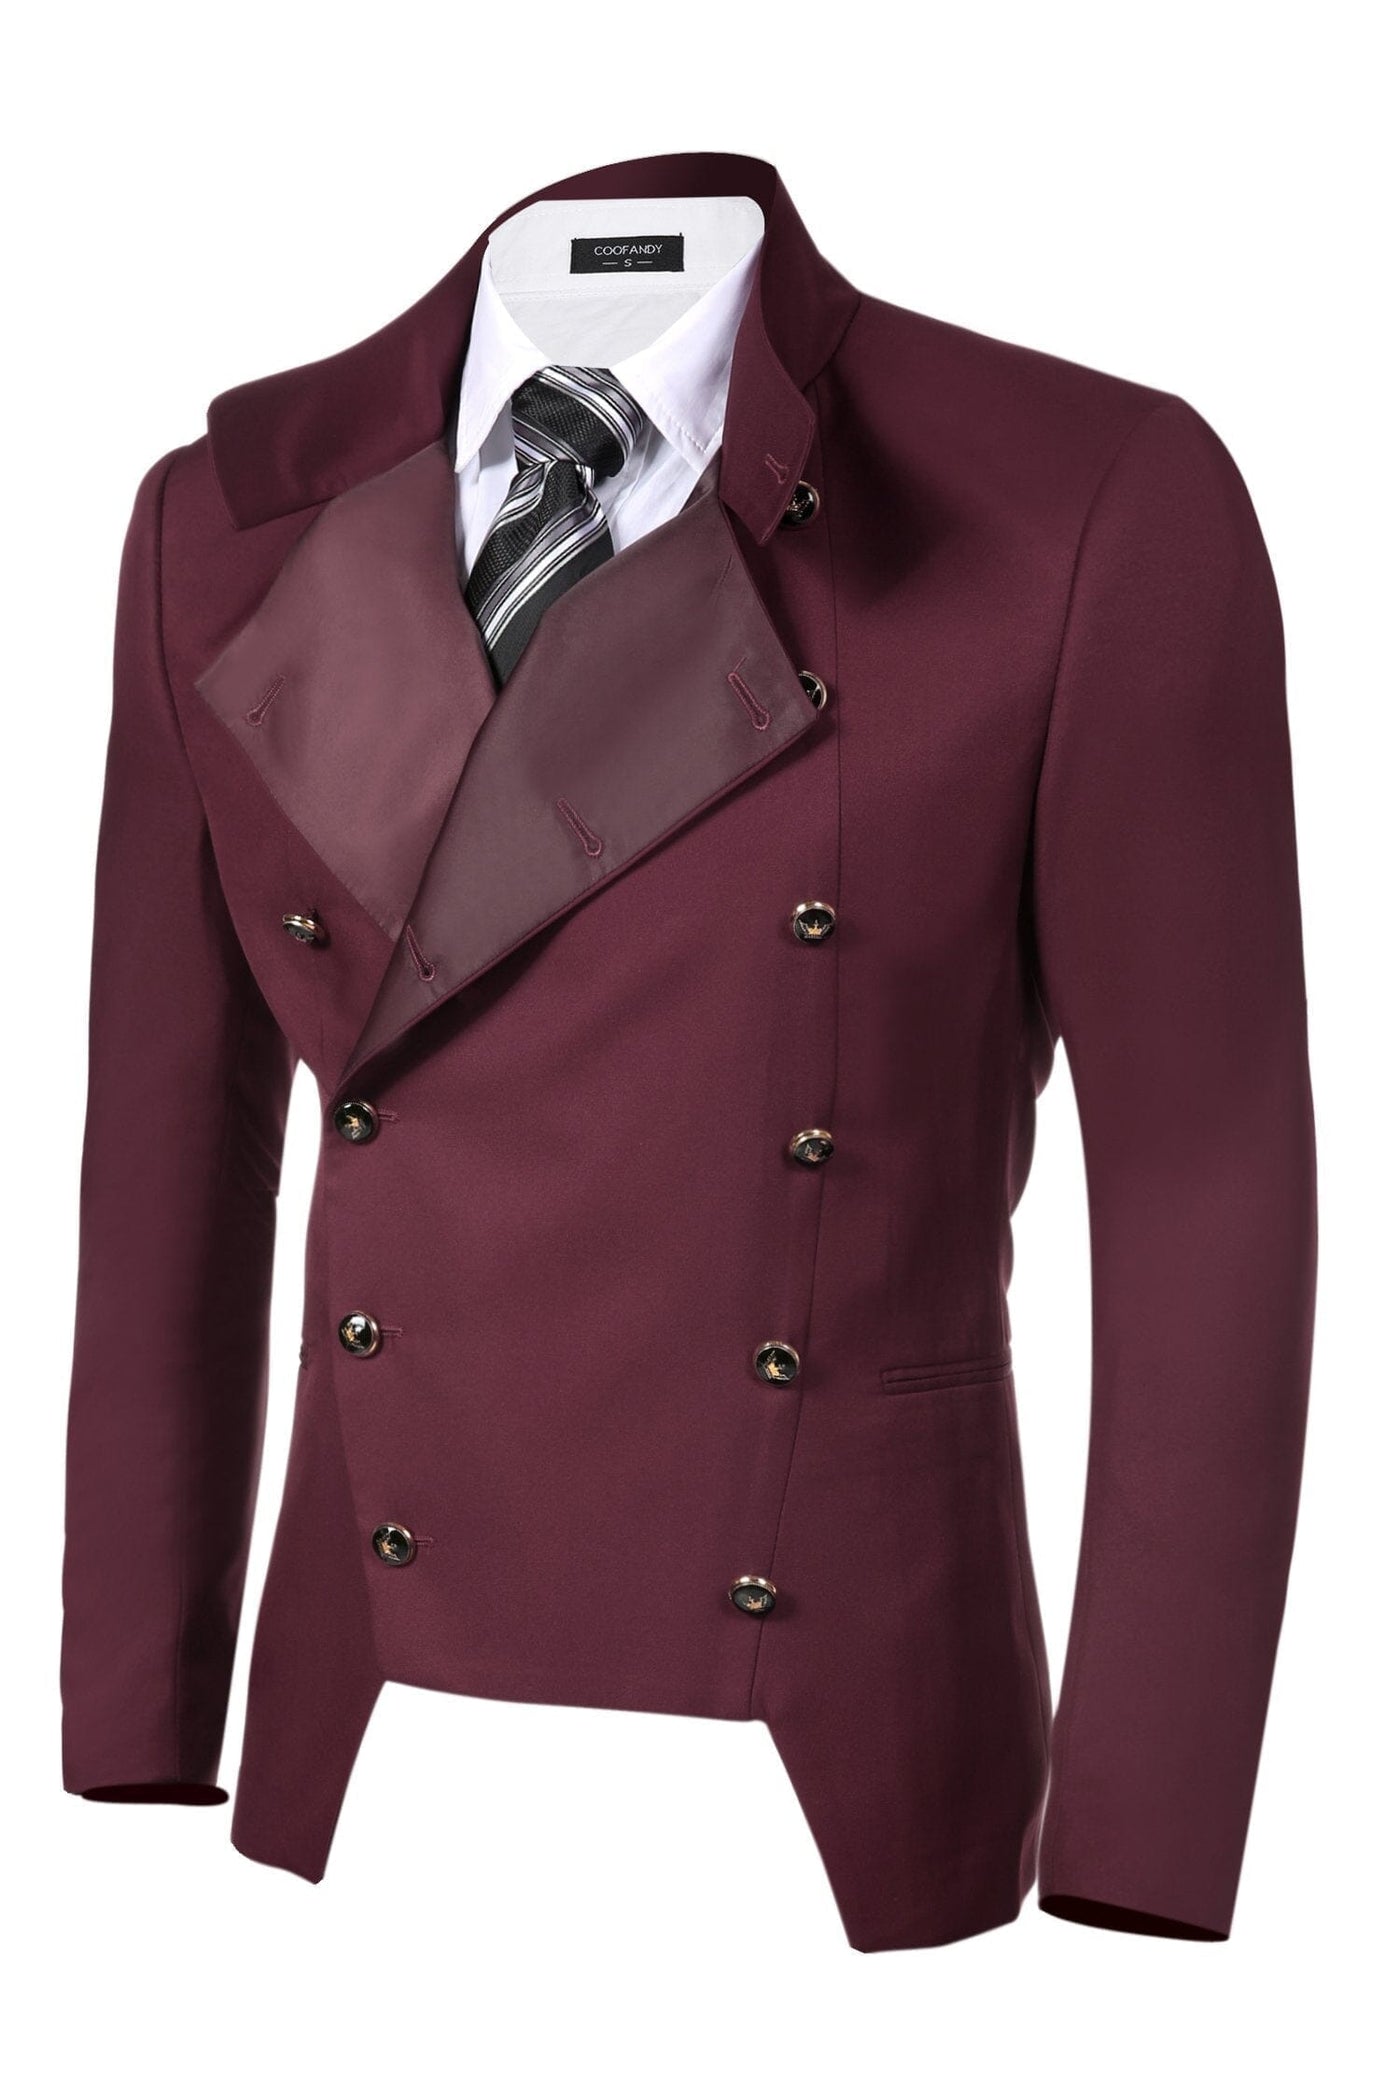 Coofandy Double-Breasted Blazer (US Only) Blazer coofandy Red S 